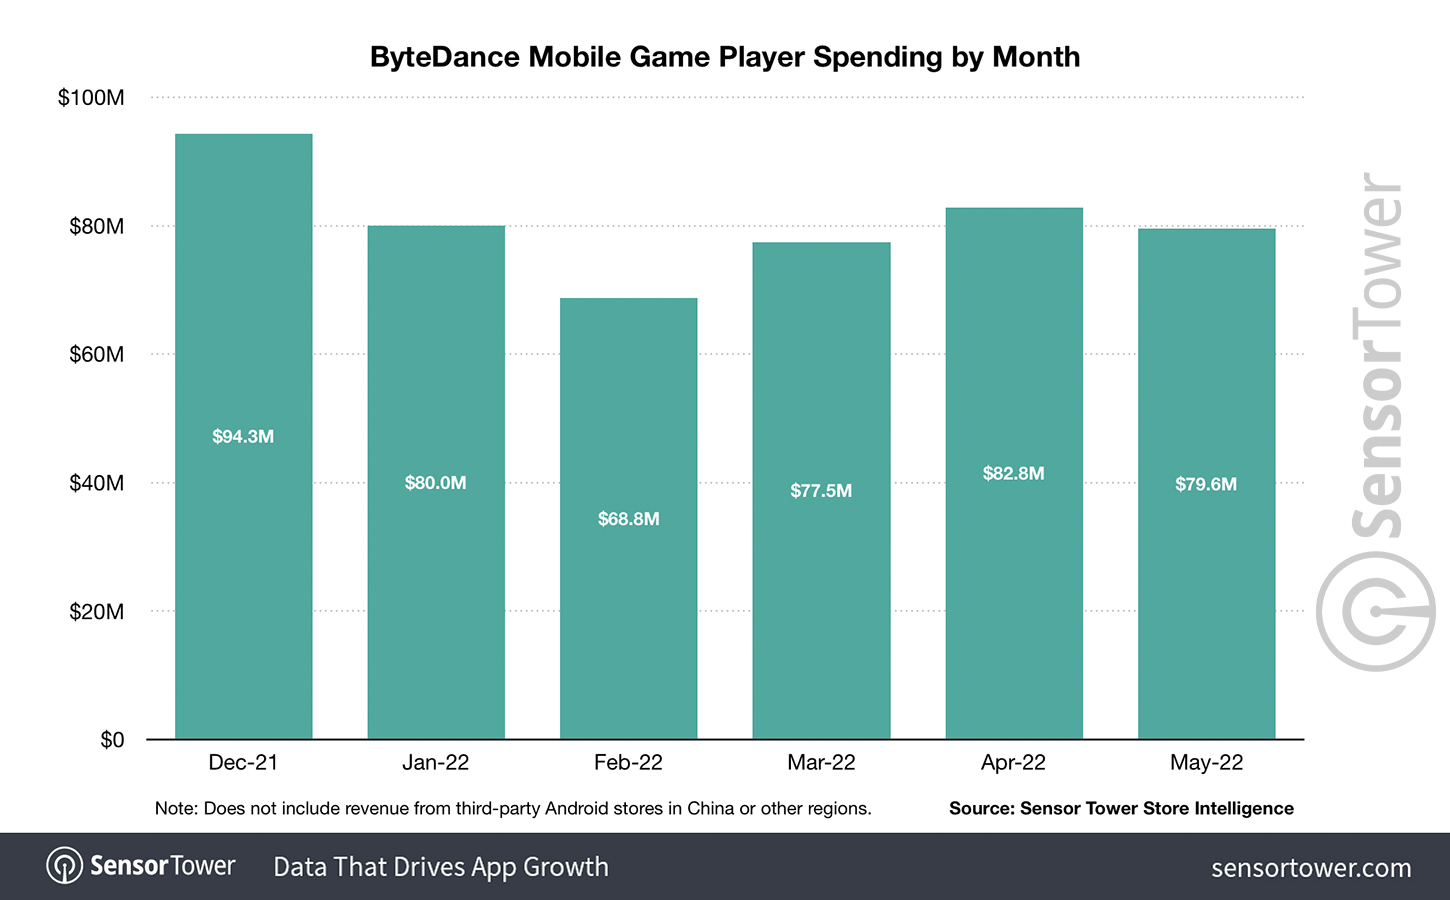 bytedance-mobile-game-player-spending-by-month